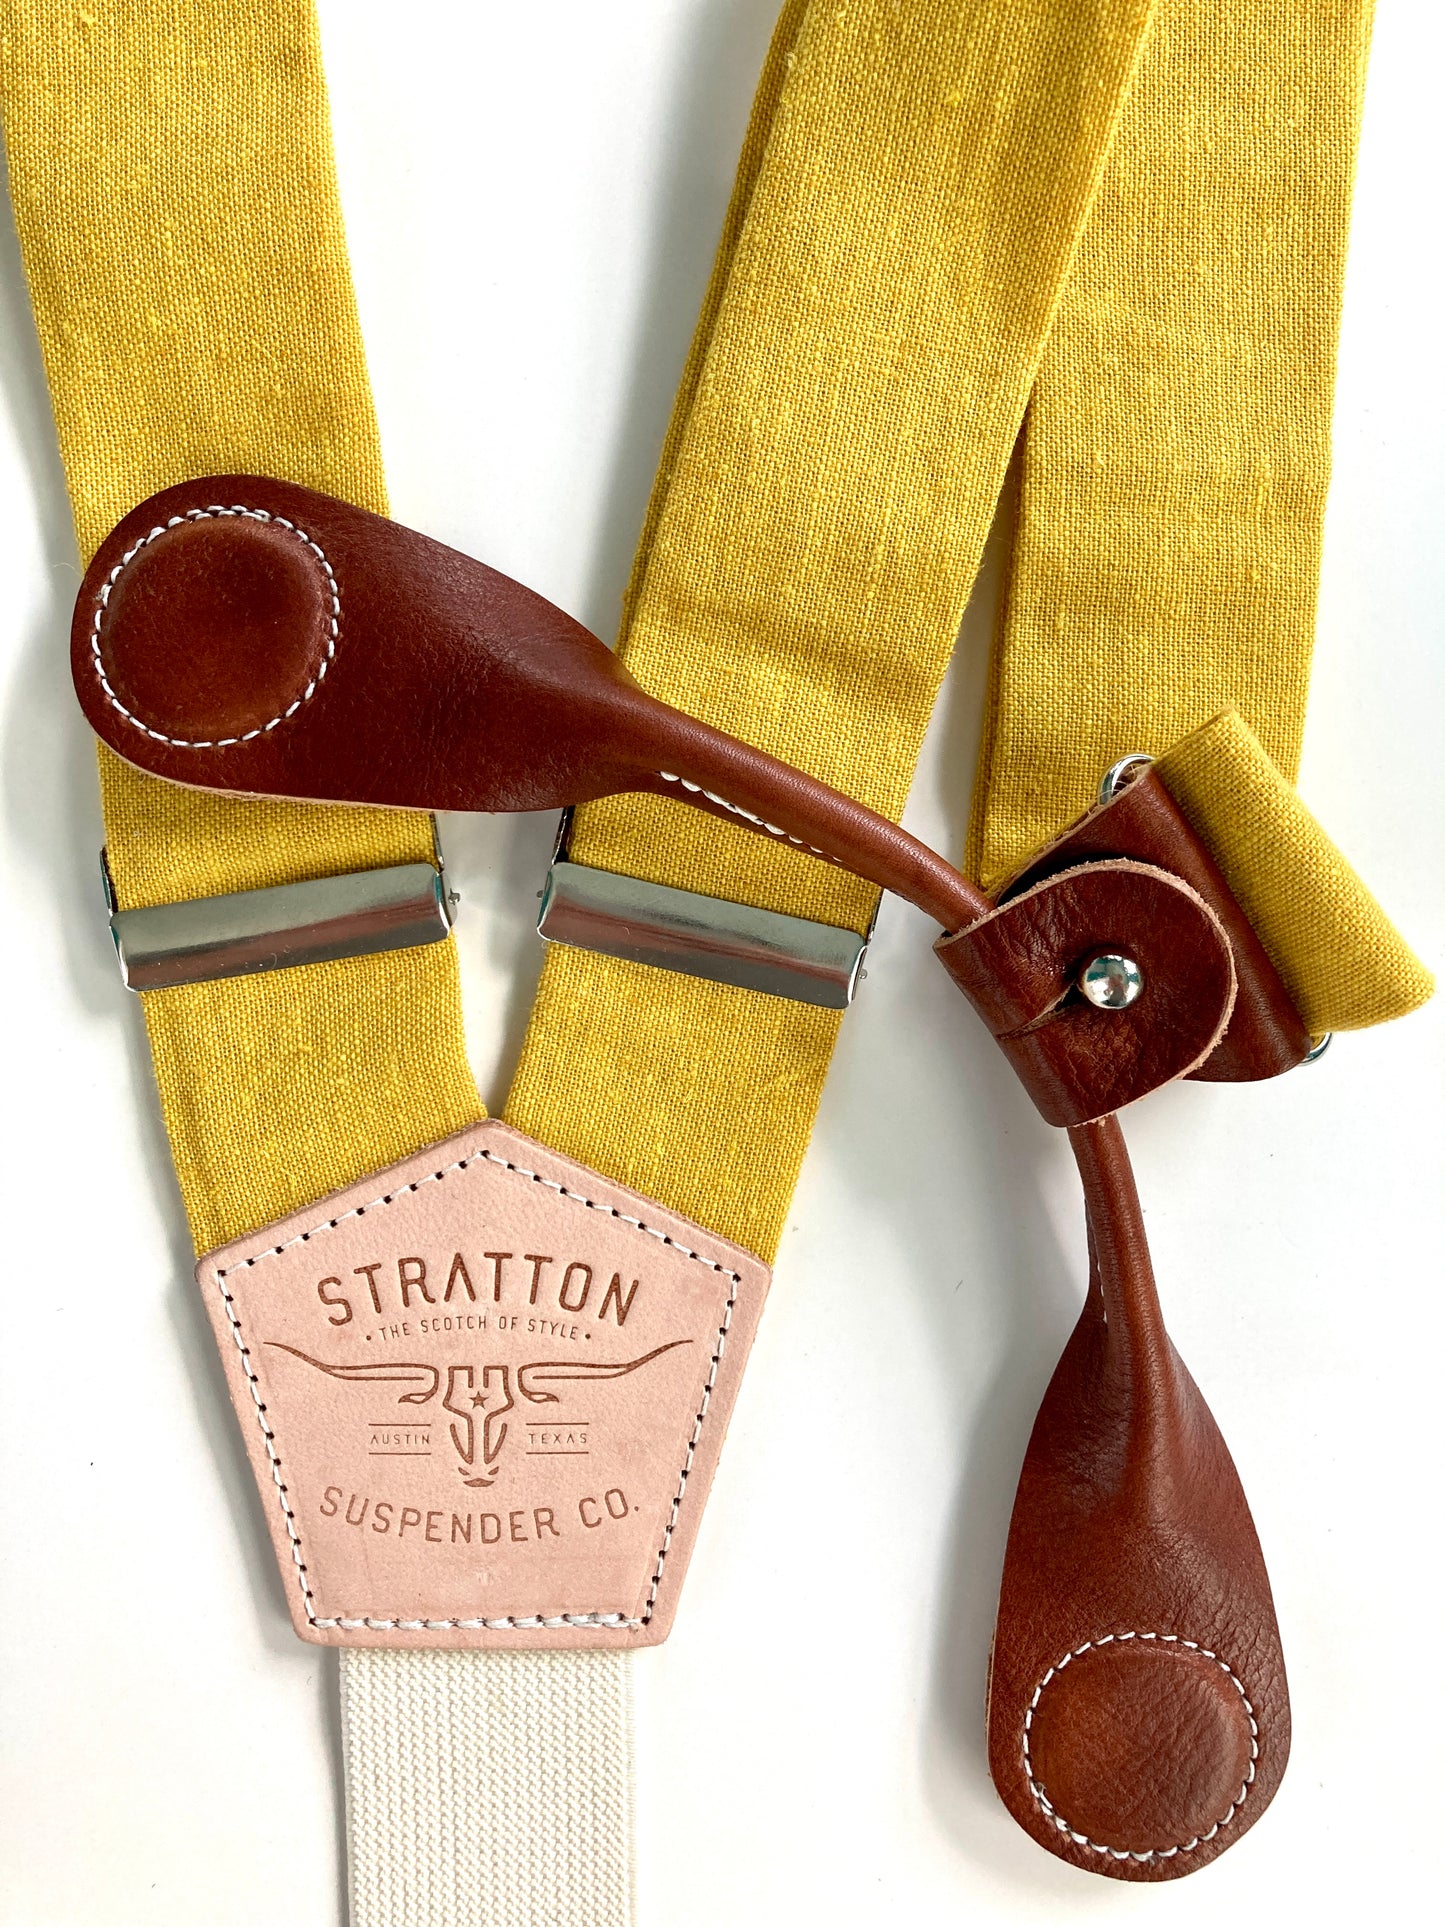 Stratton Suspender Co. features the Yellow linen suspenders on veg tan shoulder leather with cream colored elastic back strap for the Fall 2022 suspenders collection Magnetic Stratton Suspender clasps in Cognac Pontedero Italian leather hand-picked by Stratton Suspender Co.